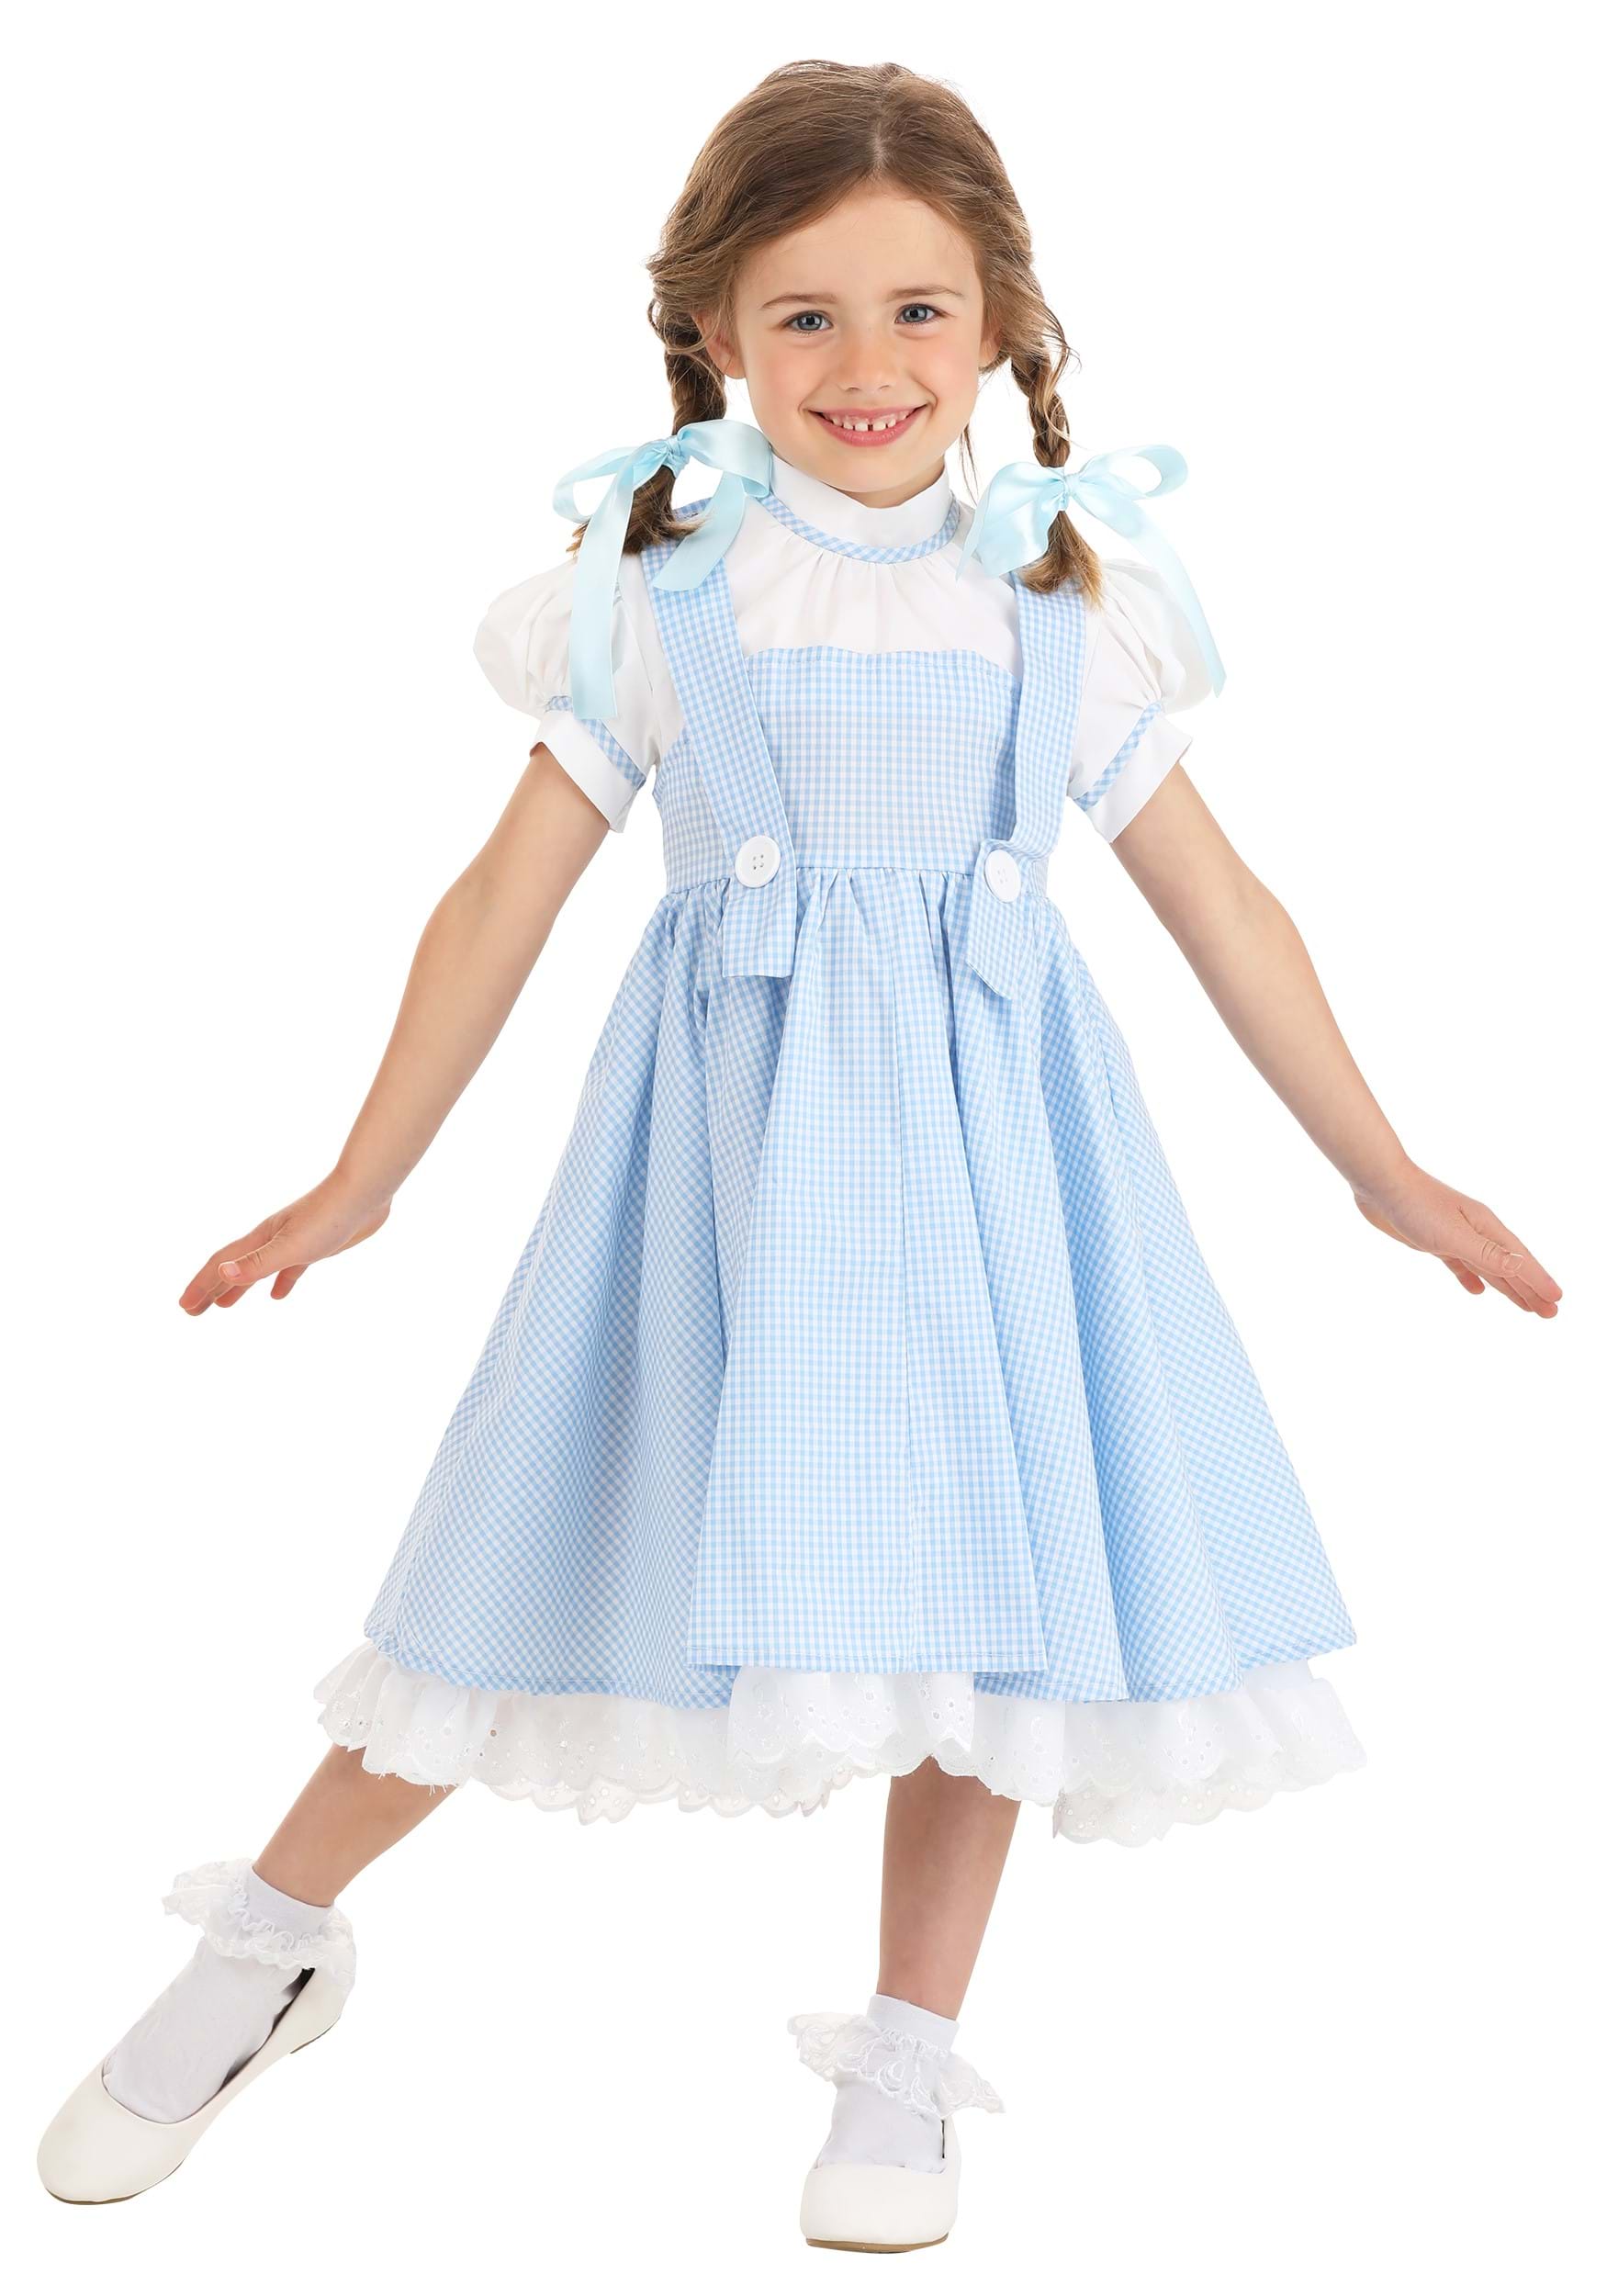 Photos - Fancy Dress Deluxe FUN Costumes  Kansas Girl Costume for Toddlers Blue/White FUN643 